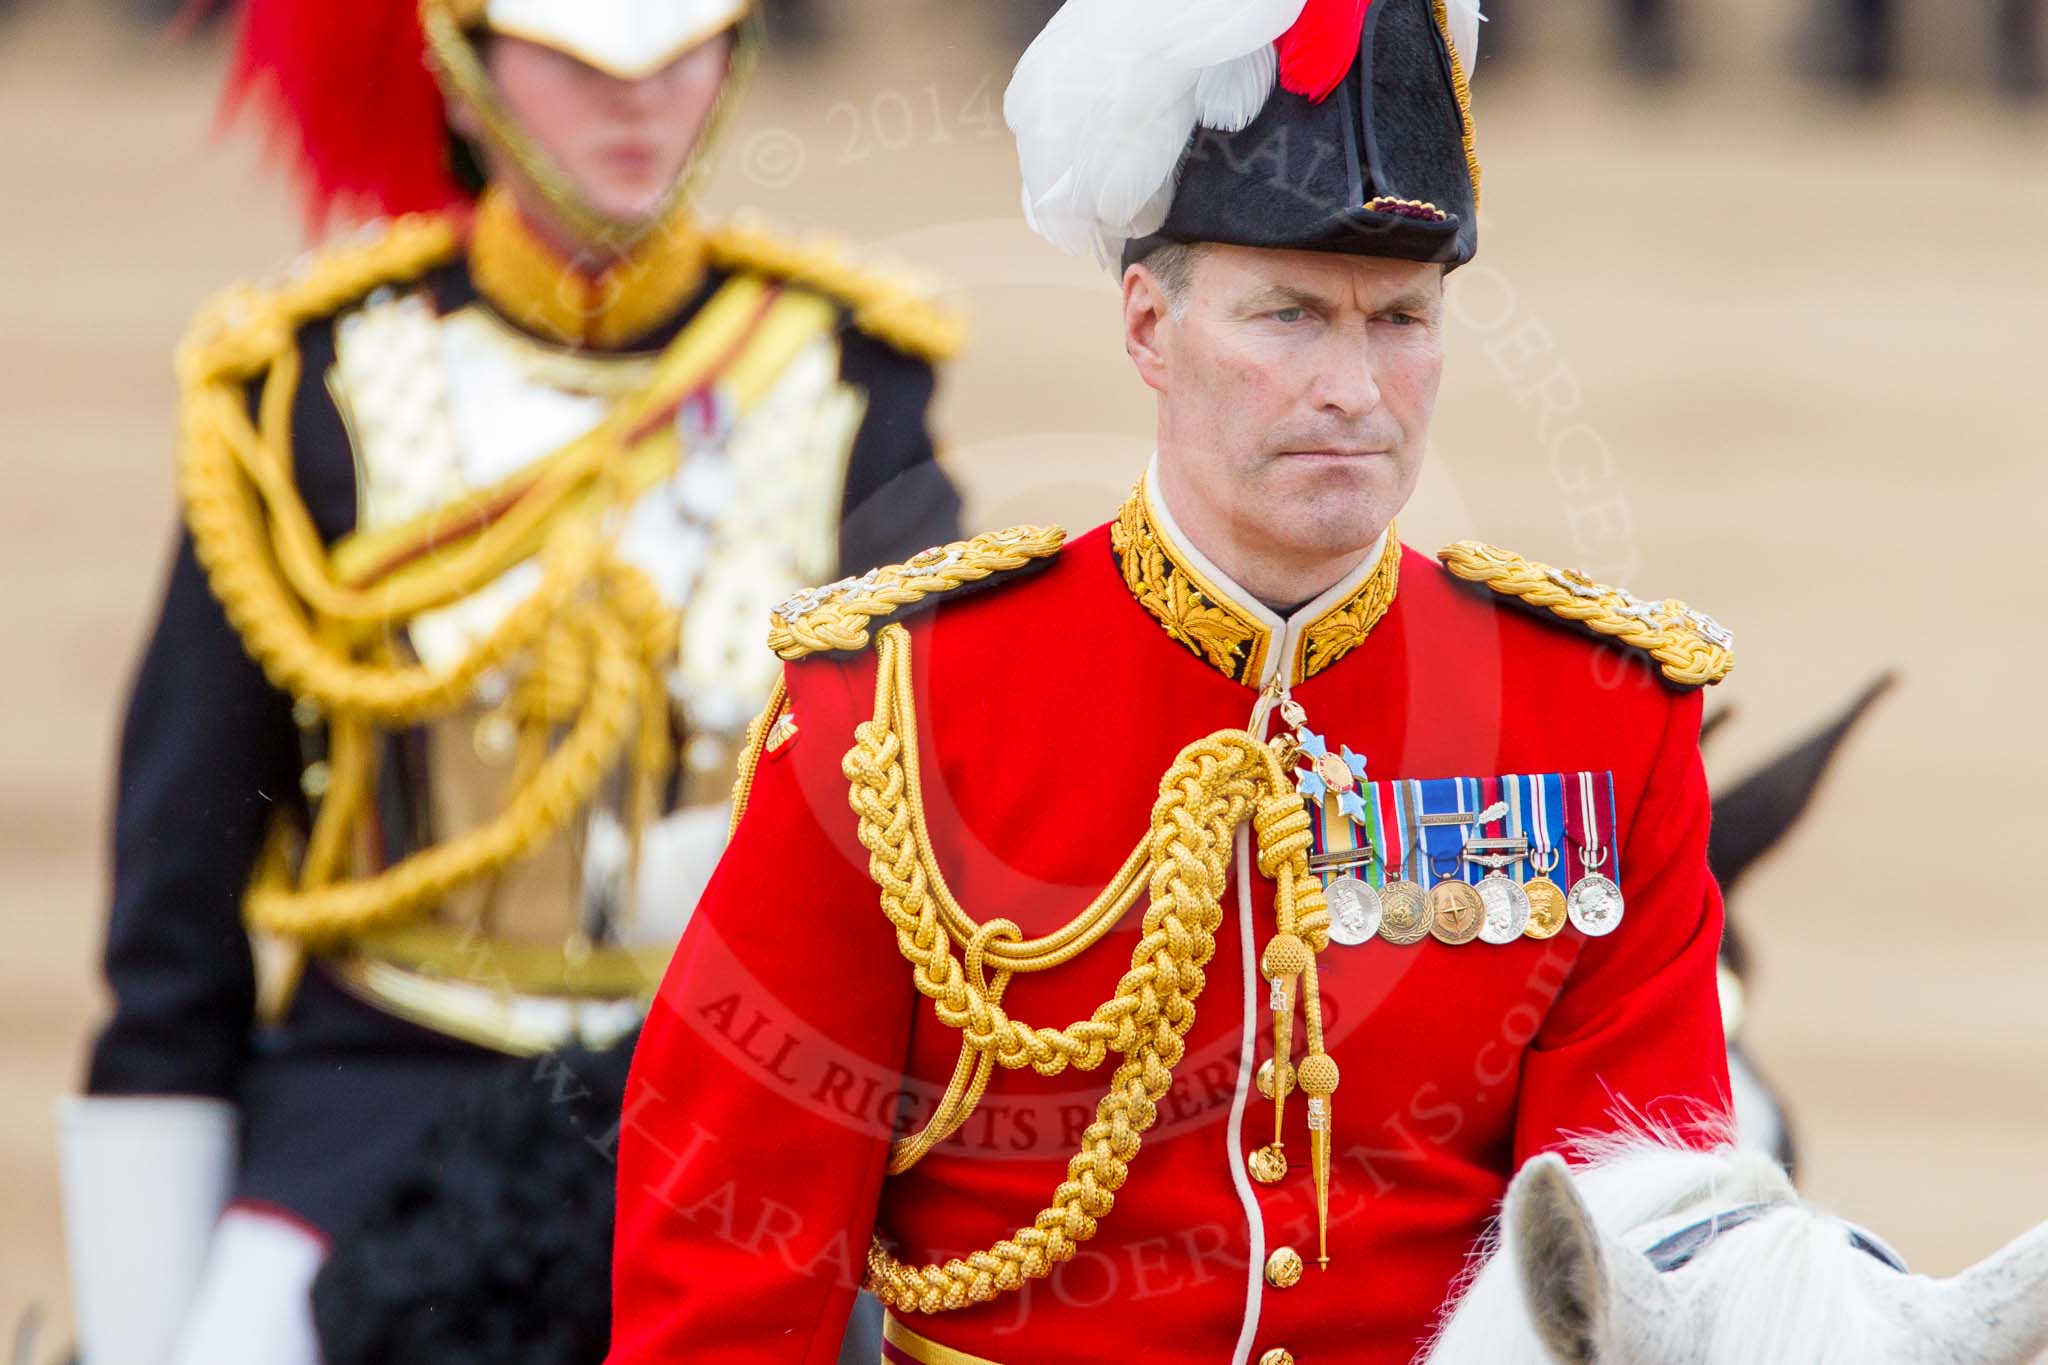 Trooping the Colour 2014.
Horse Guards Parade, Westminster,
London SW1A,

United Kingdom,
on 14 June 2014 at 11:08, image #443